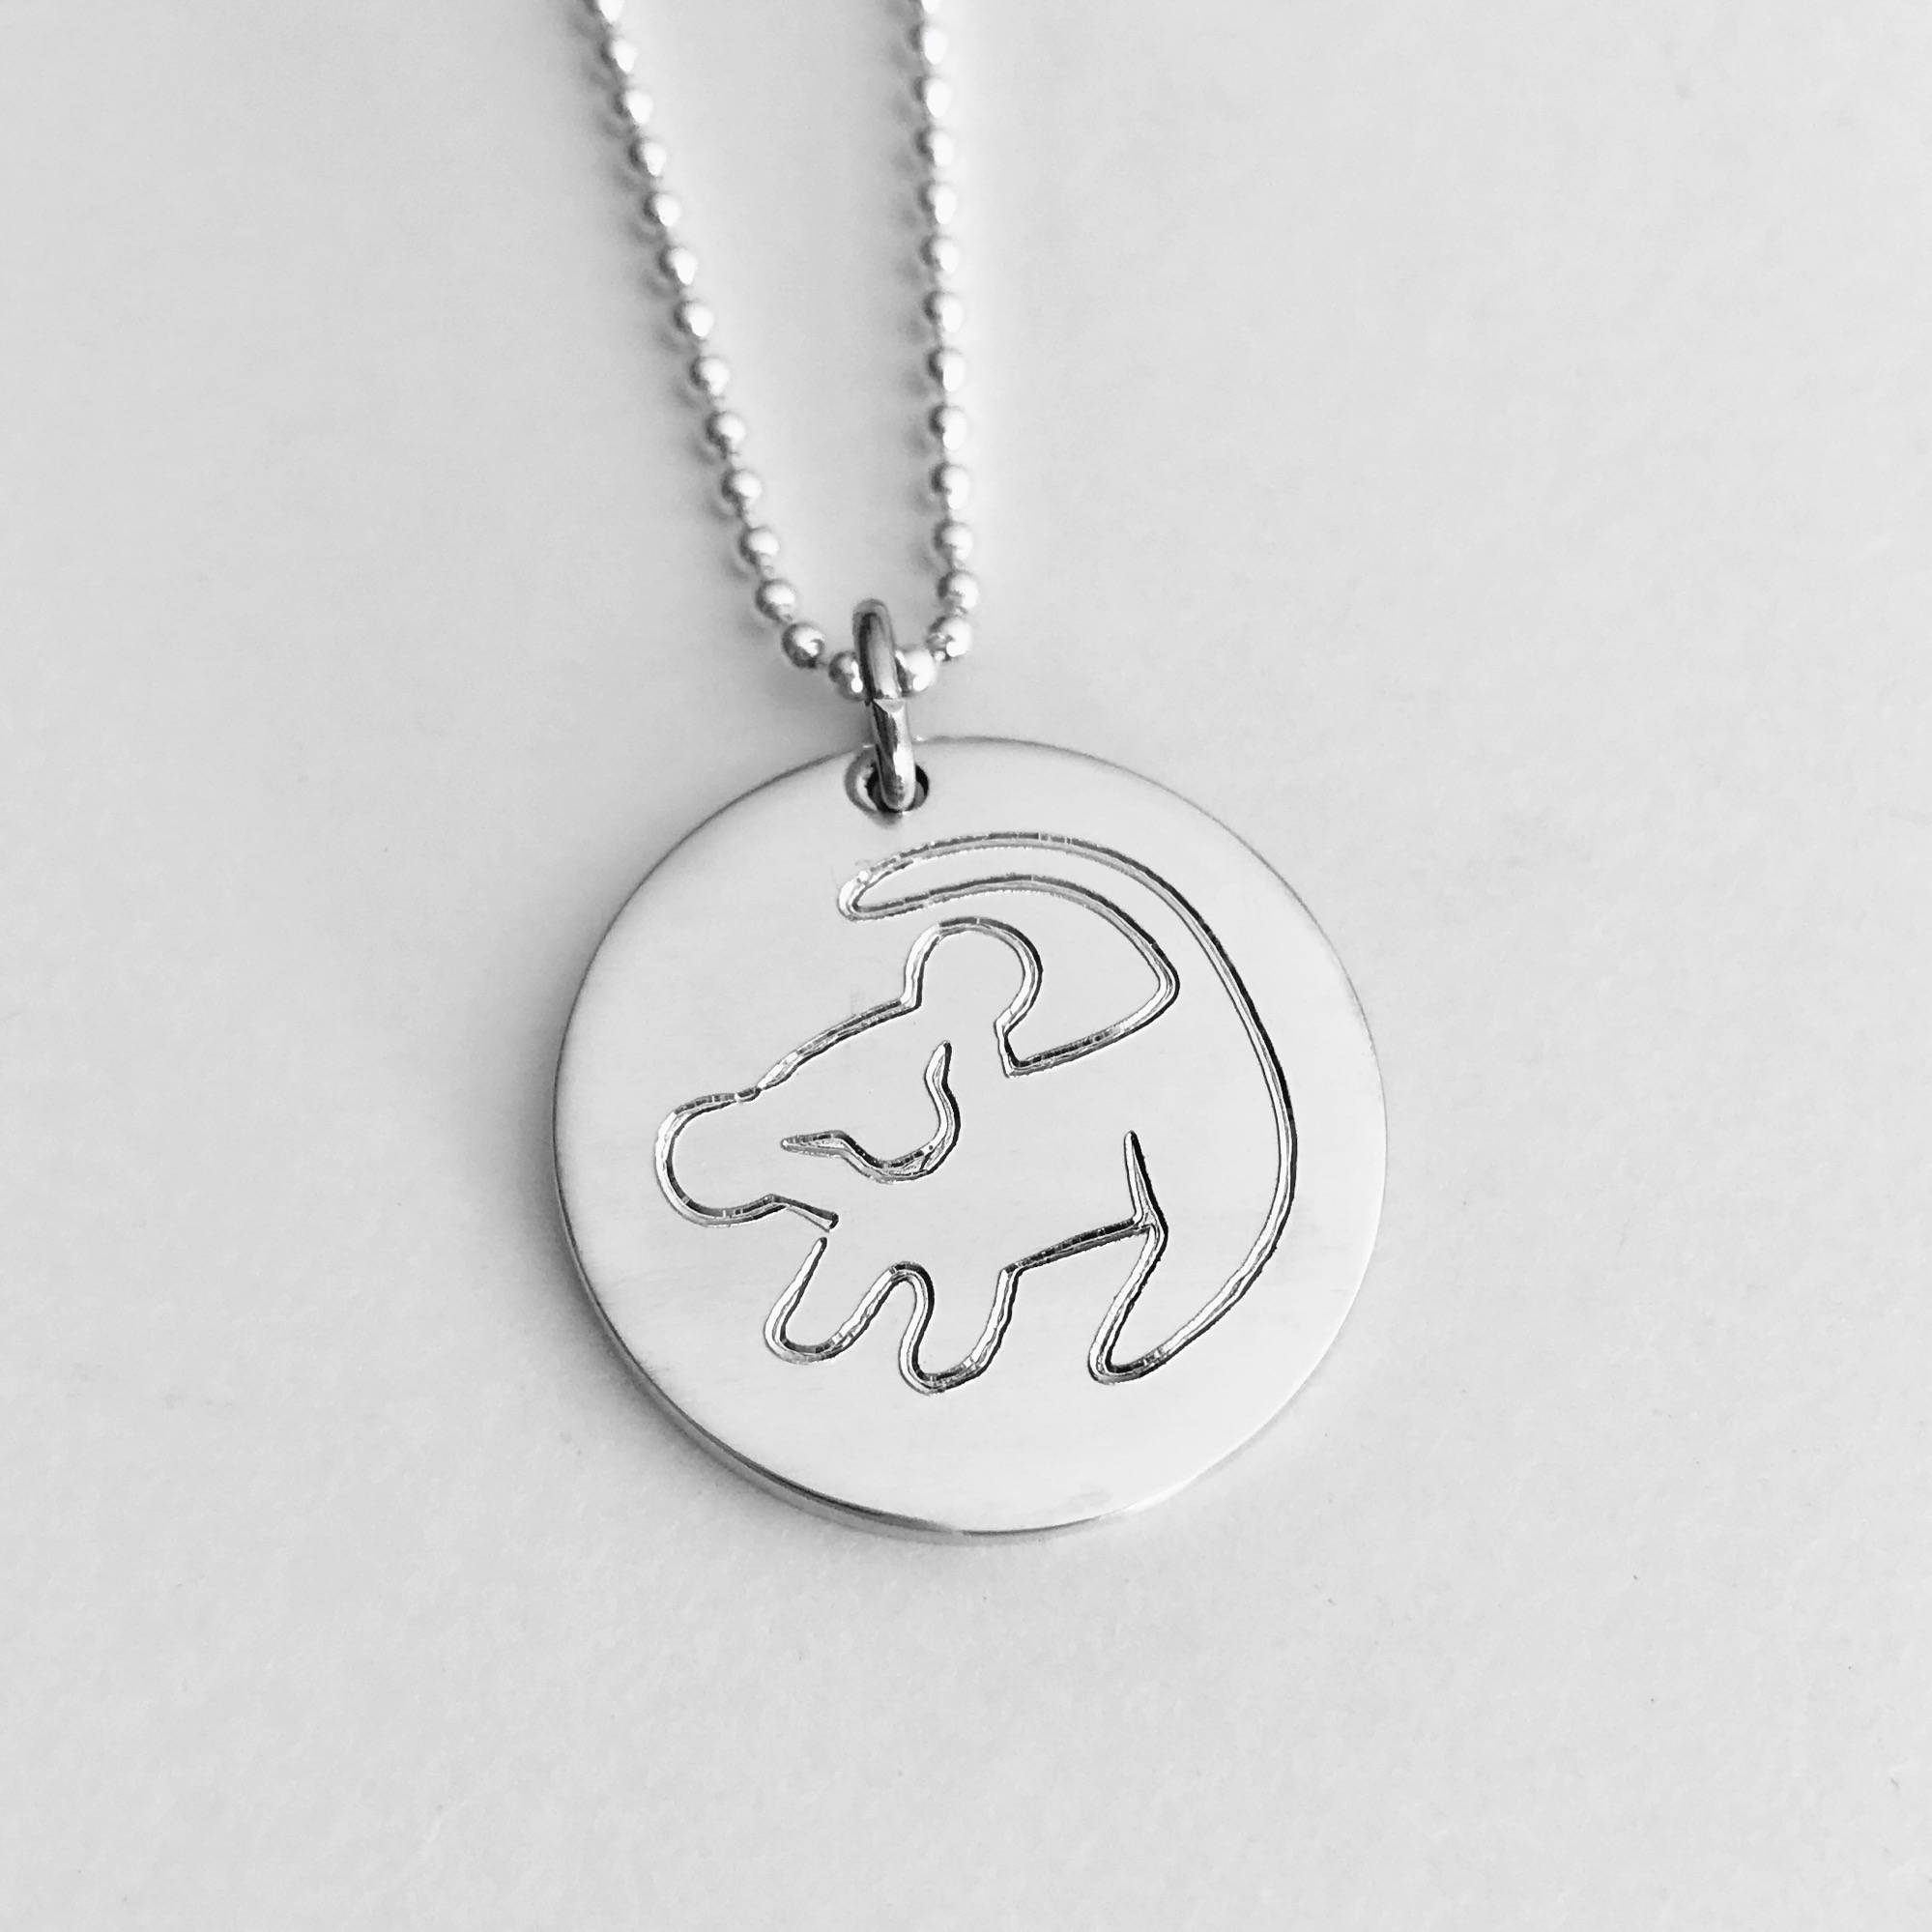 SIMBA LION CHARM Necklace 16" Silver Plated Chain Present Christmas In Gift Bag.